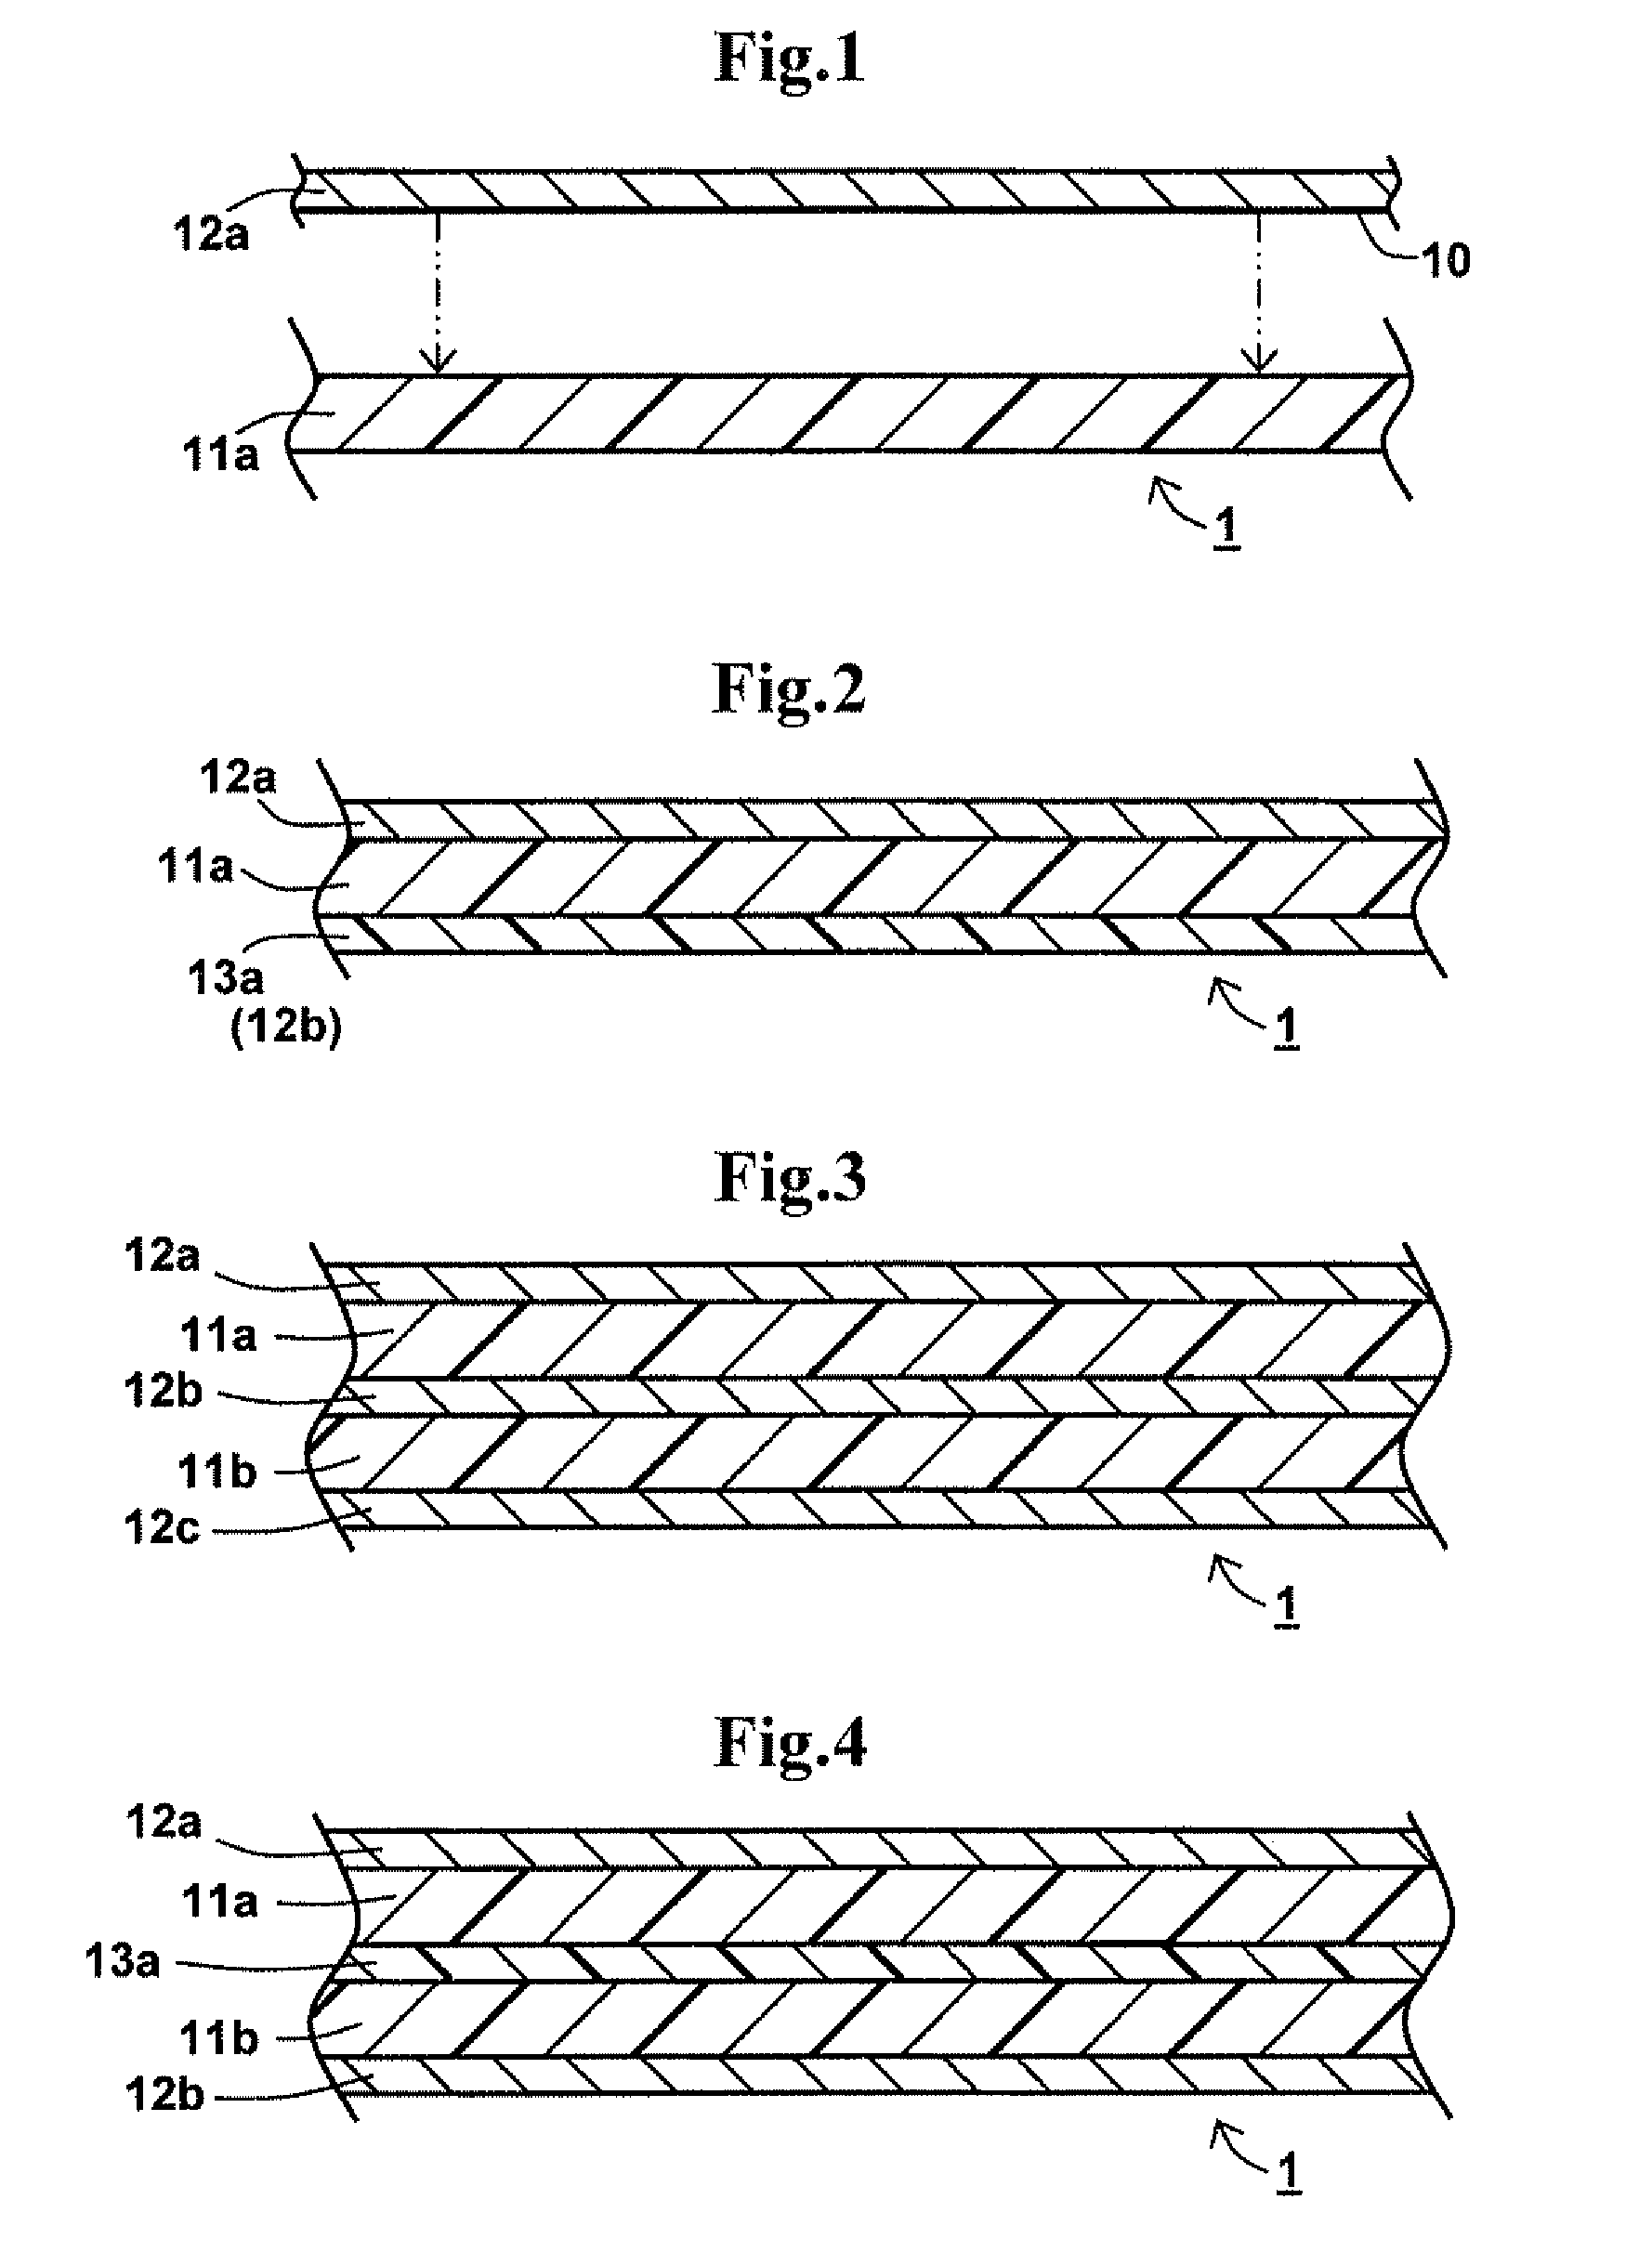 Three-dimensional silicone-rubber bonded object